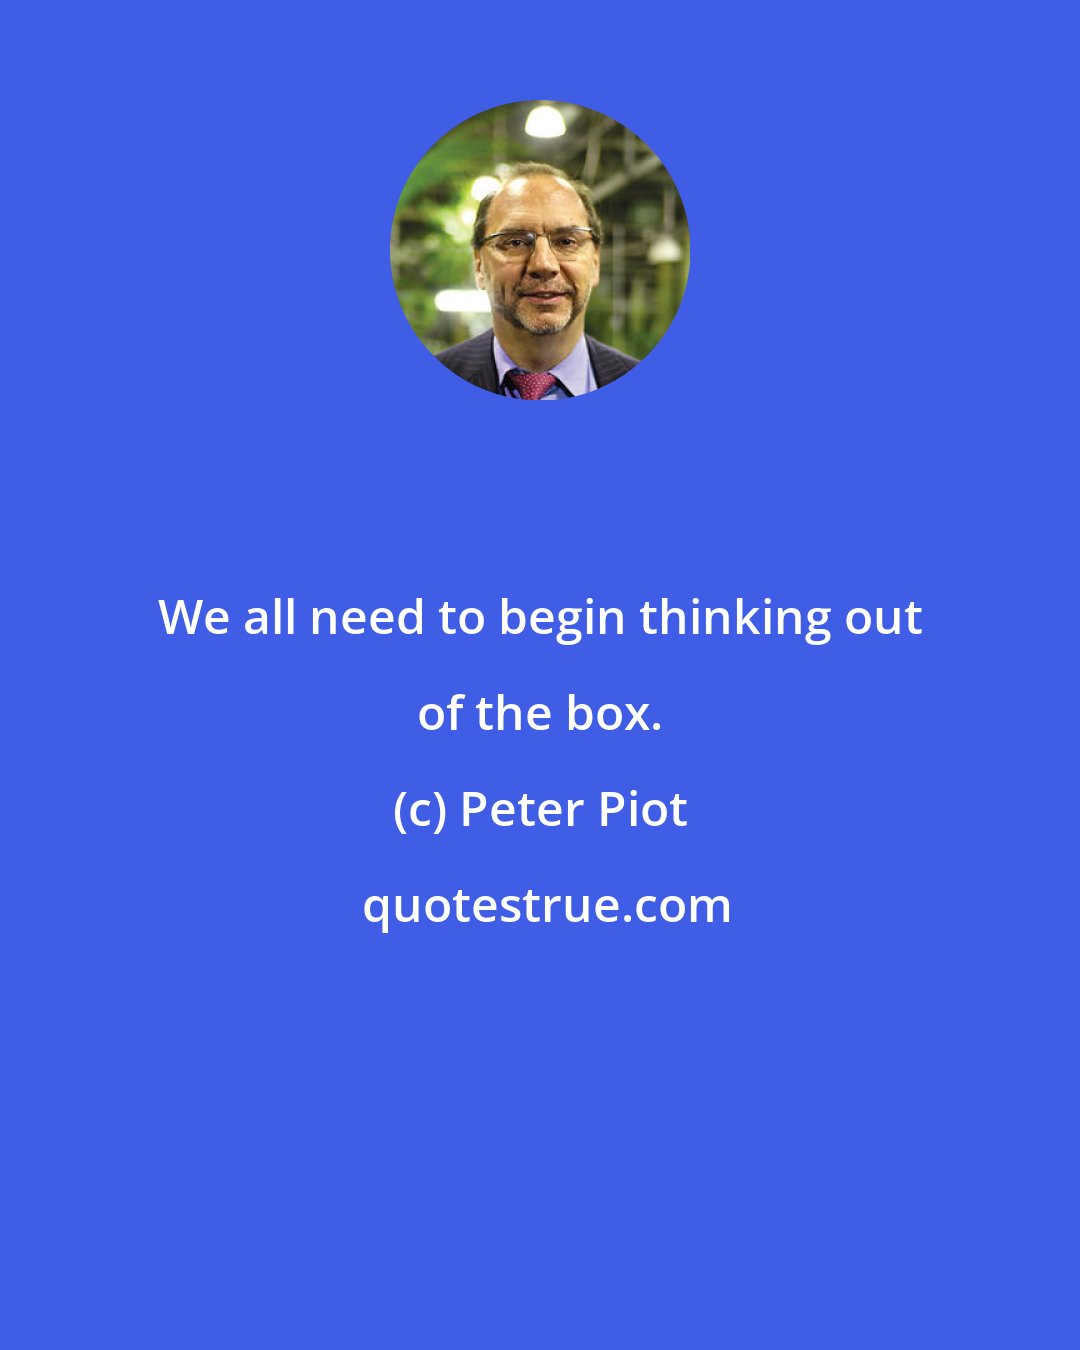 Peter Piot: We all need to begin thinking out of the box.